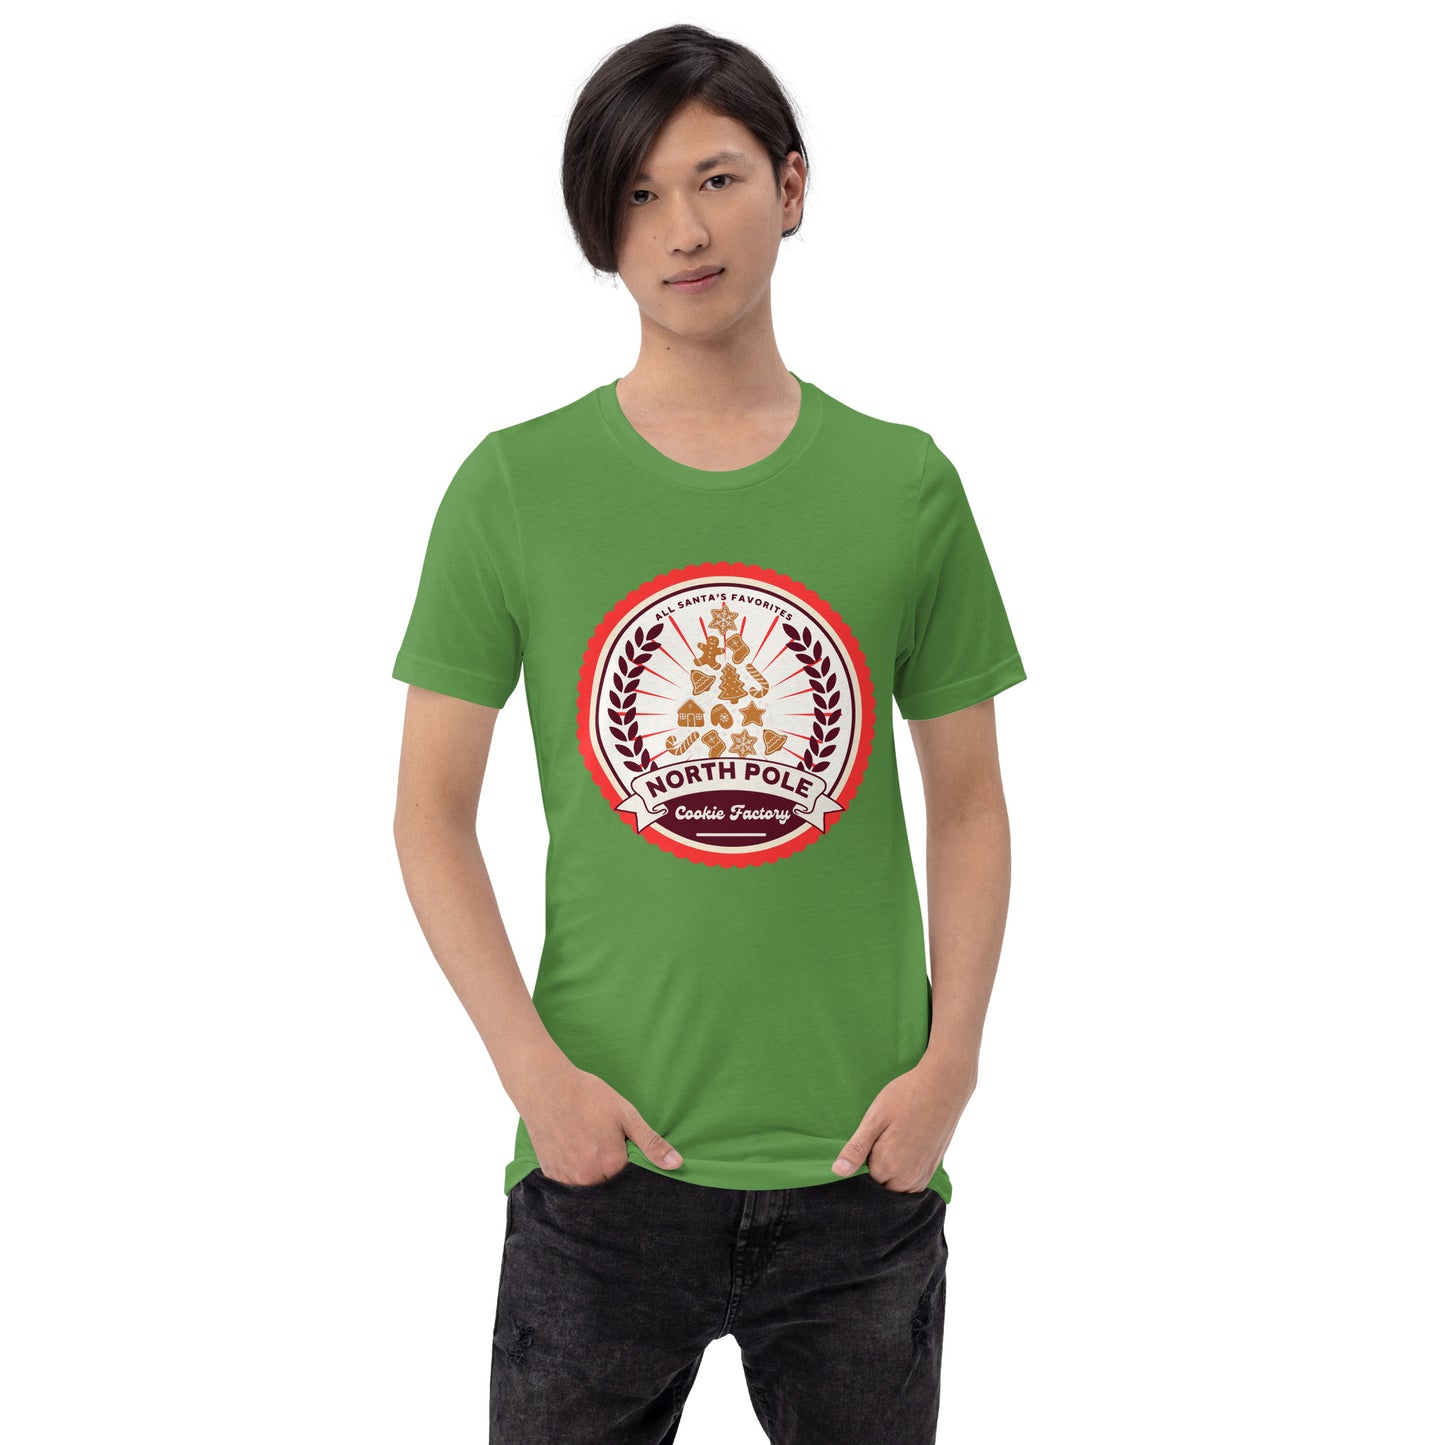 North Pole Cookies t-shirt